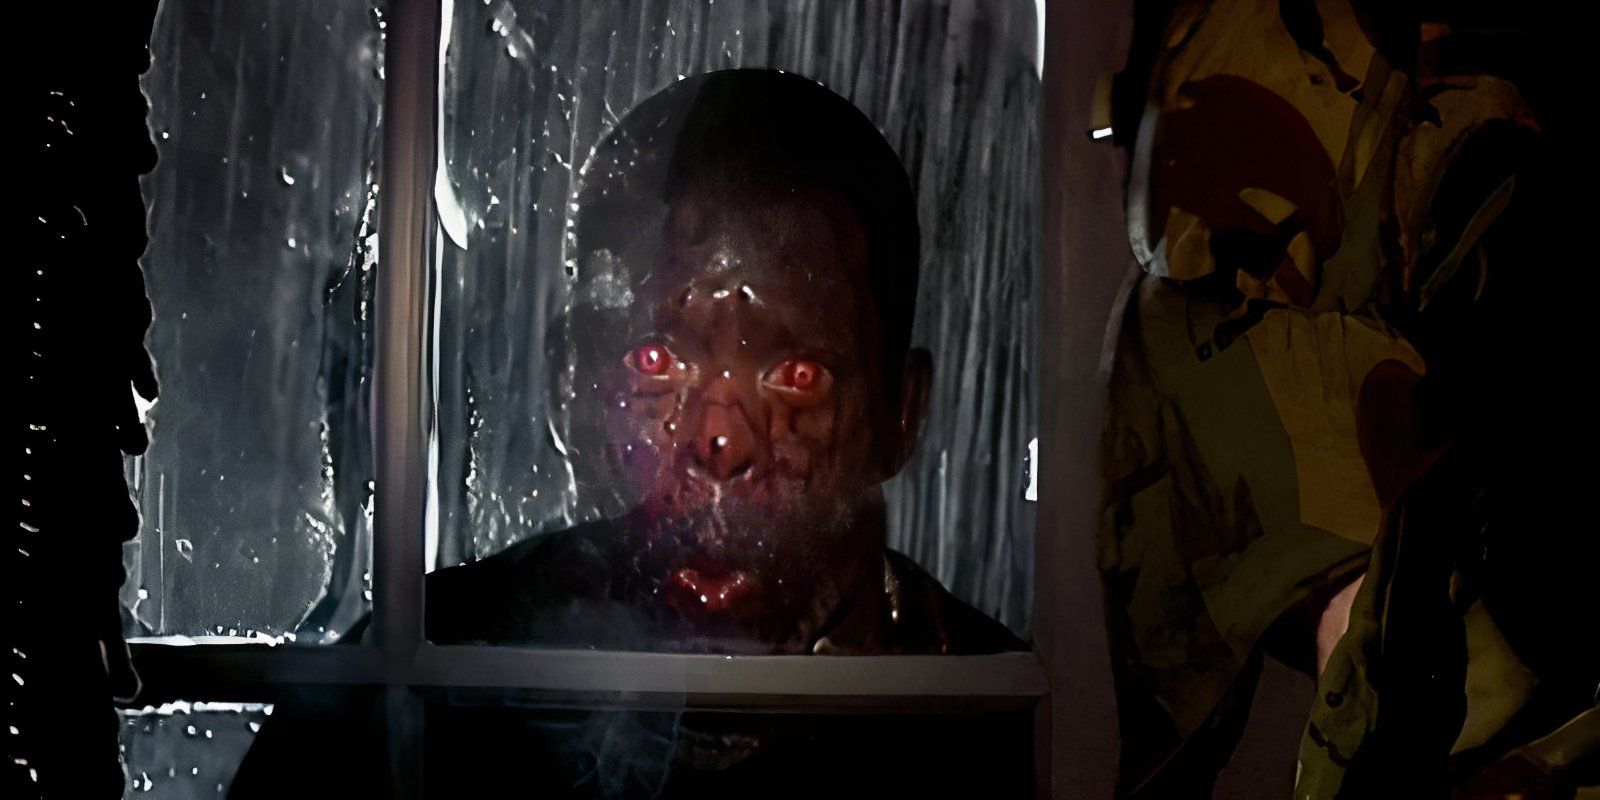 Red eyed Zombie in 28 Days Later looks through the window in the rain